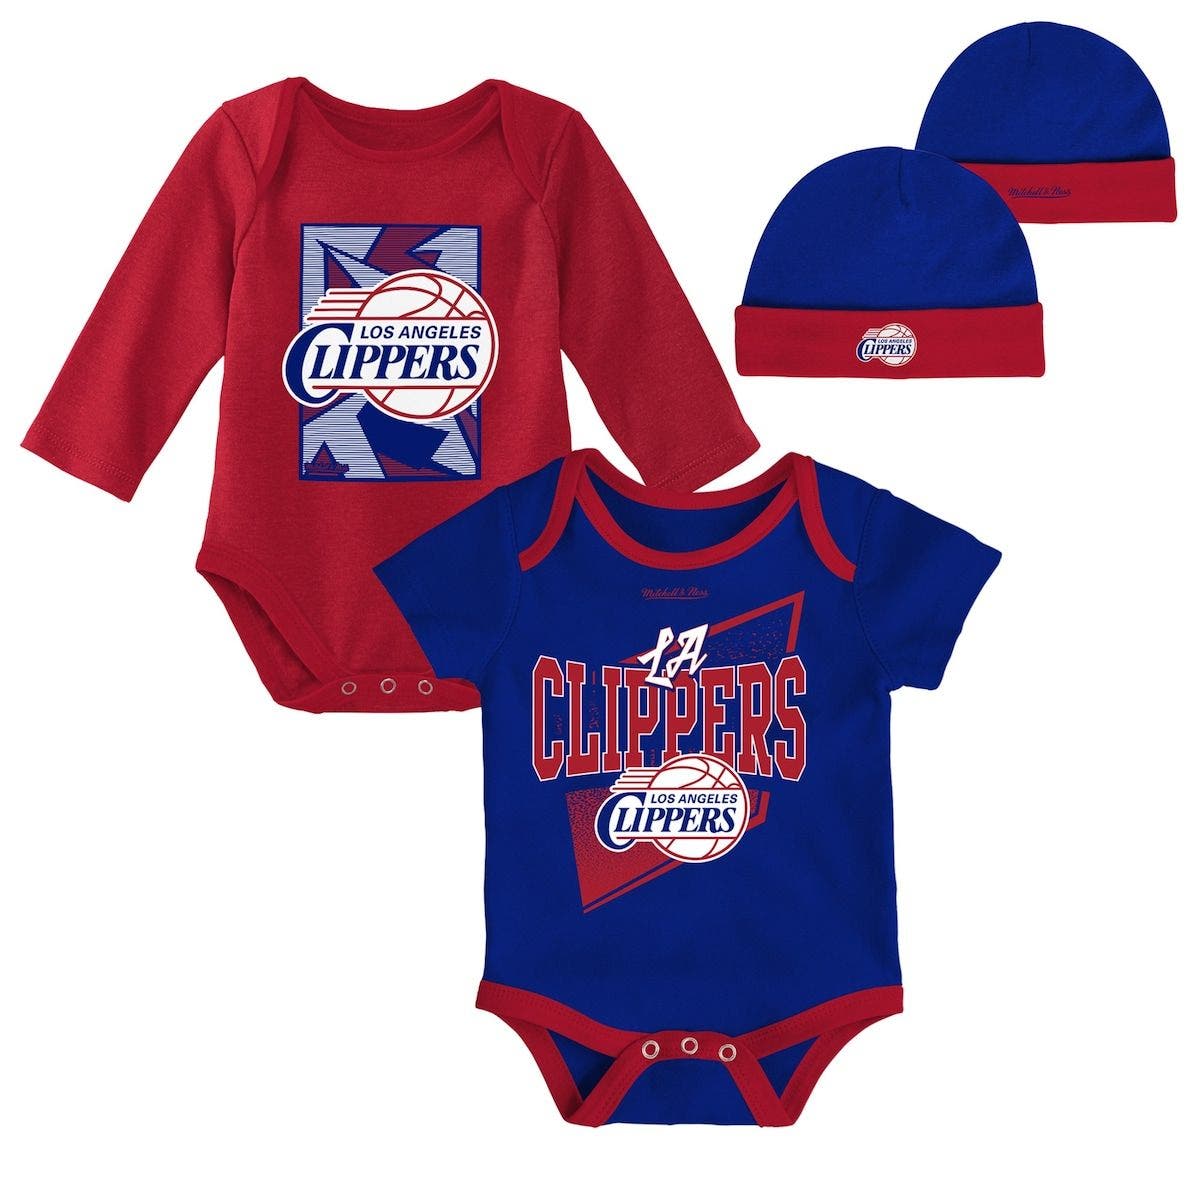 Nordstrom Accessories Headwear Hats Newborn & Infant Royal/Red LA Clippers 3-Piece Hardwood Classics Bodysuits & Cuffed Knit Hat Set at Nordstrom 